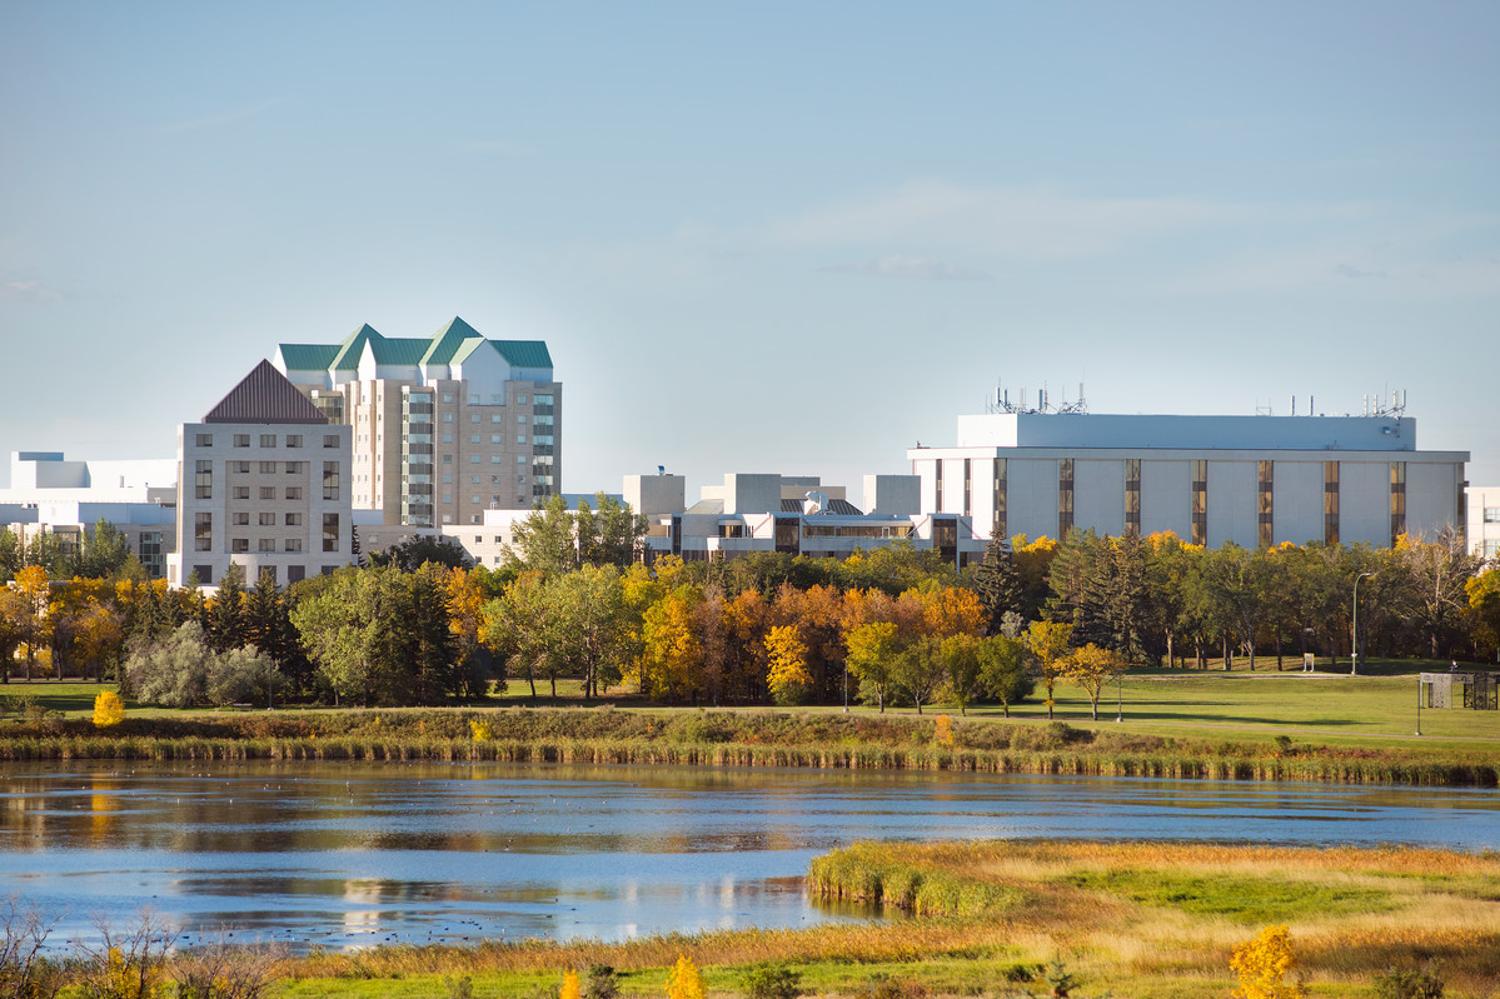 Landscape view of University of Regina campus from across Wascana Lake.